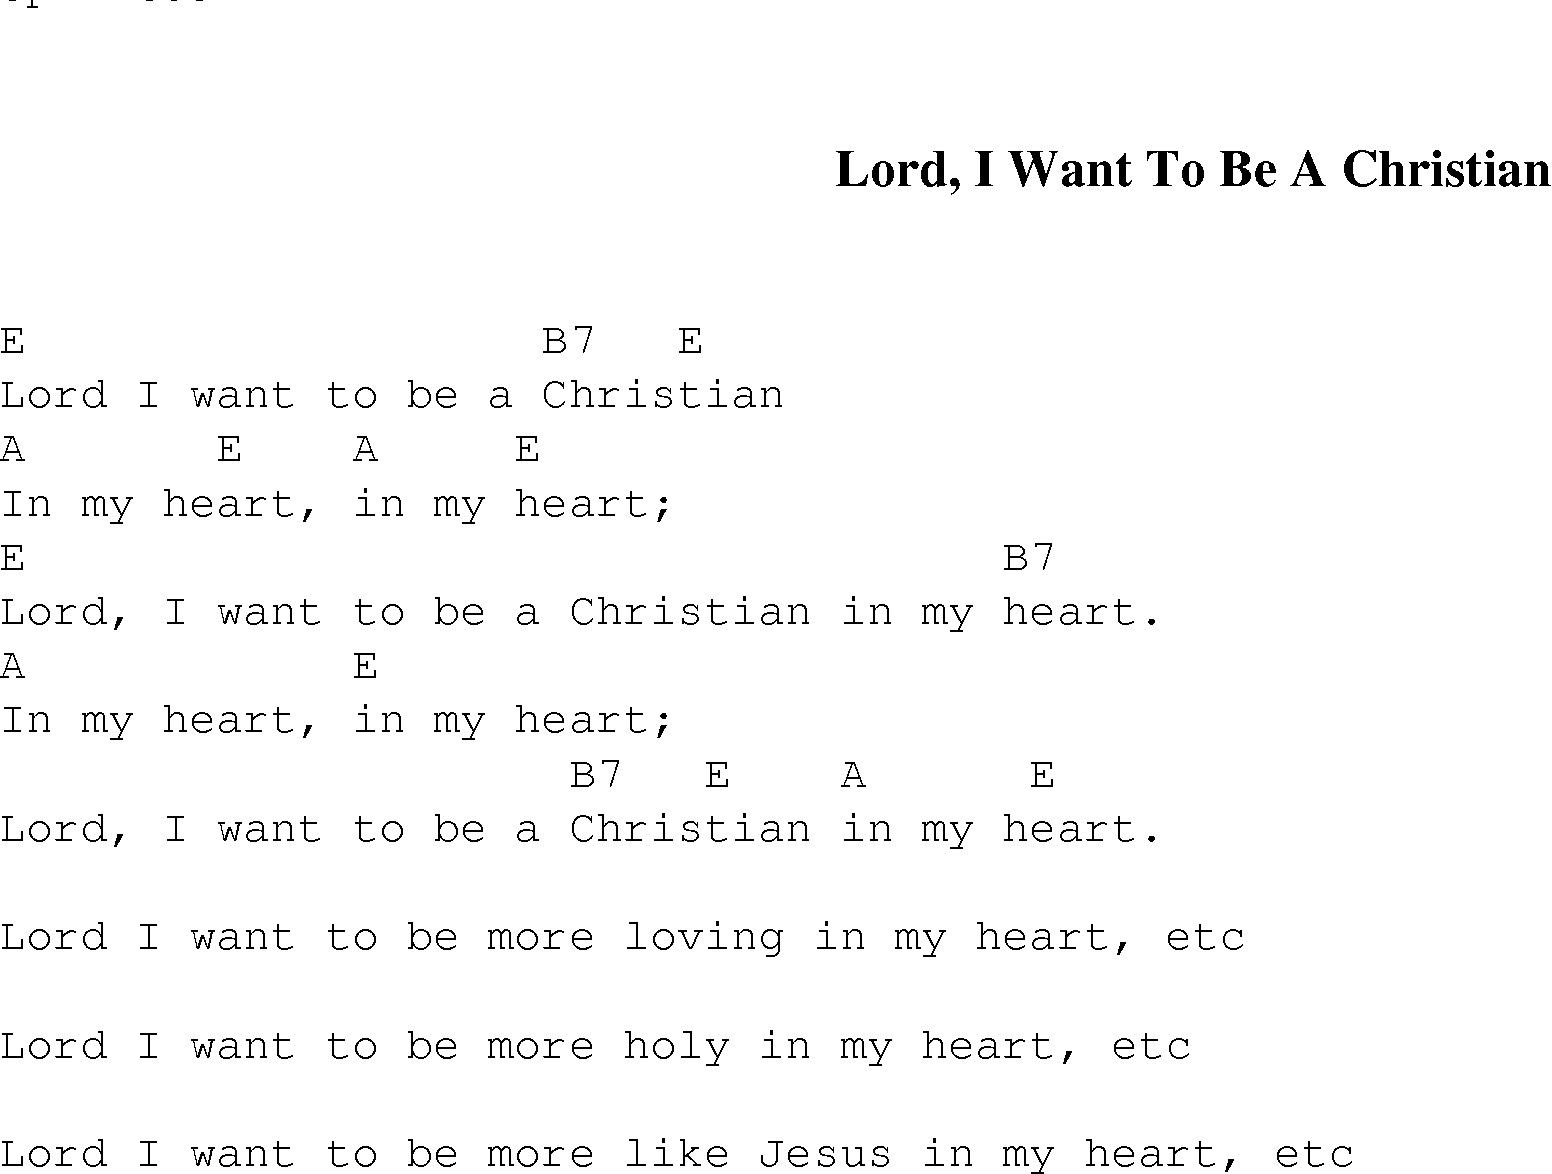 Gospel Song: lord_i_want_to_be_a_christian, lyrics and chords.